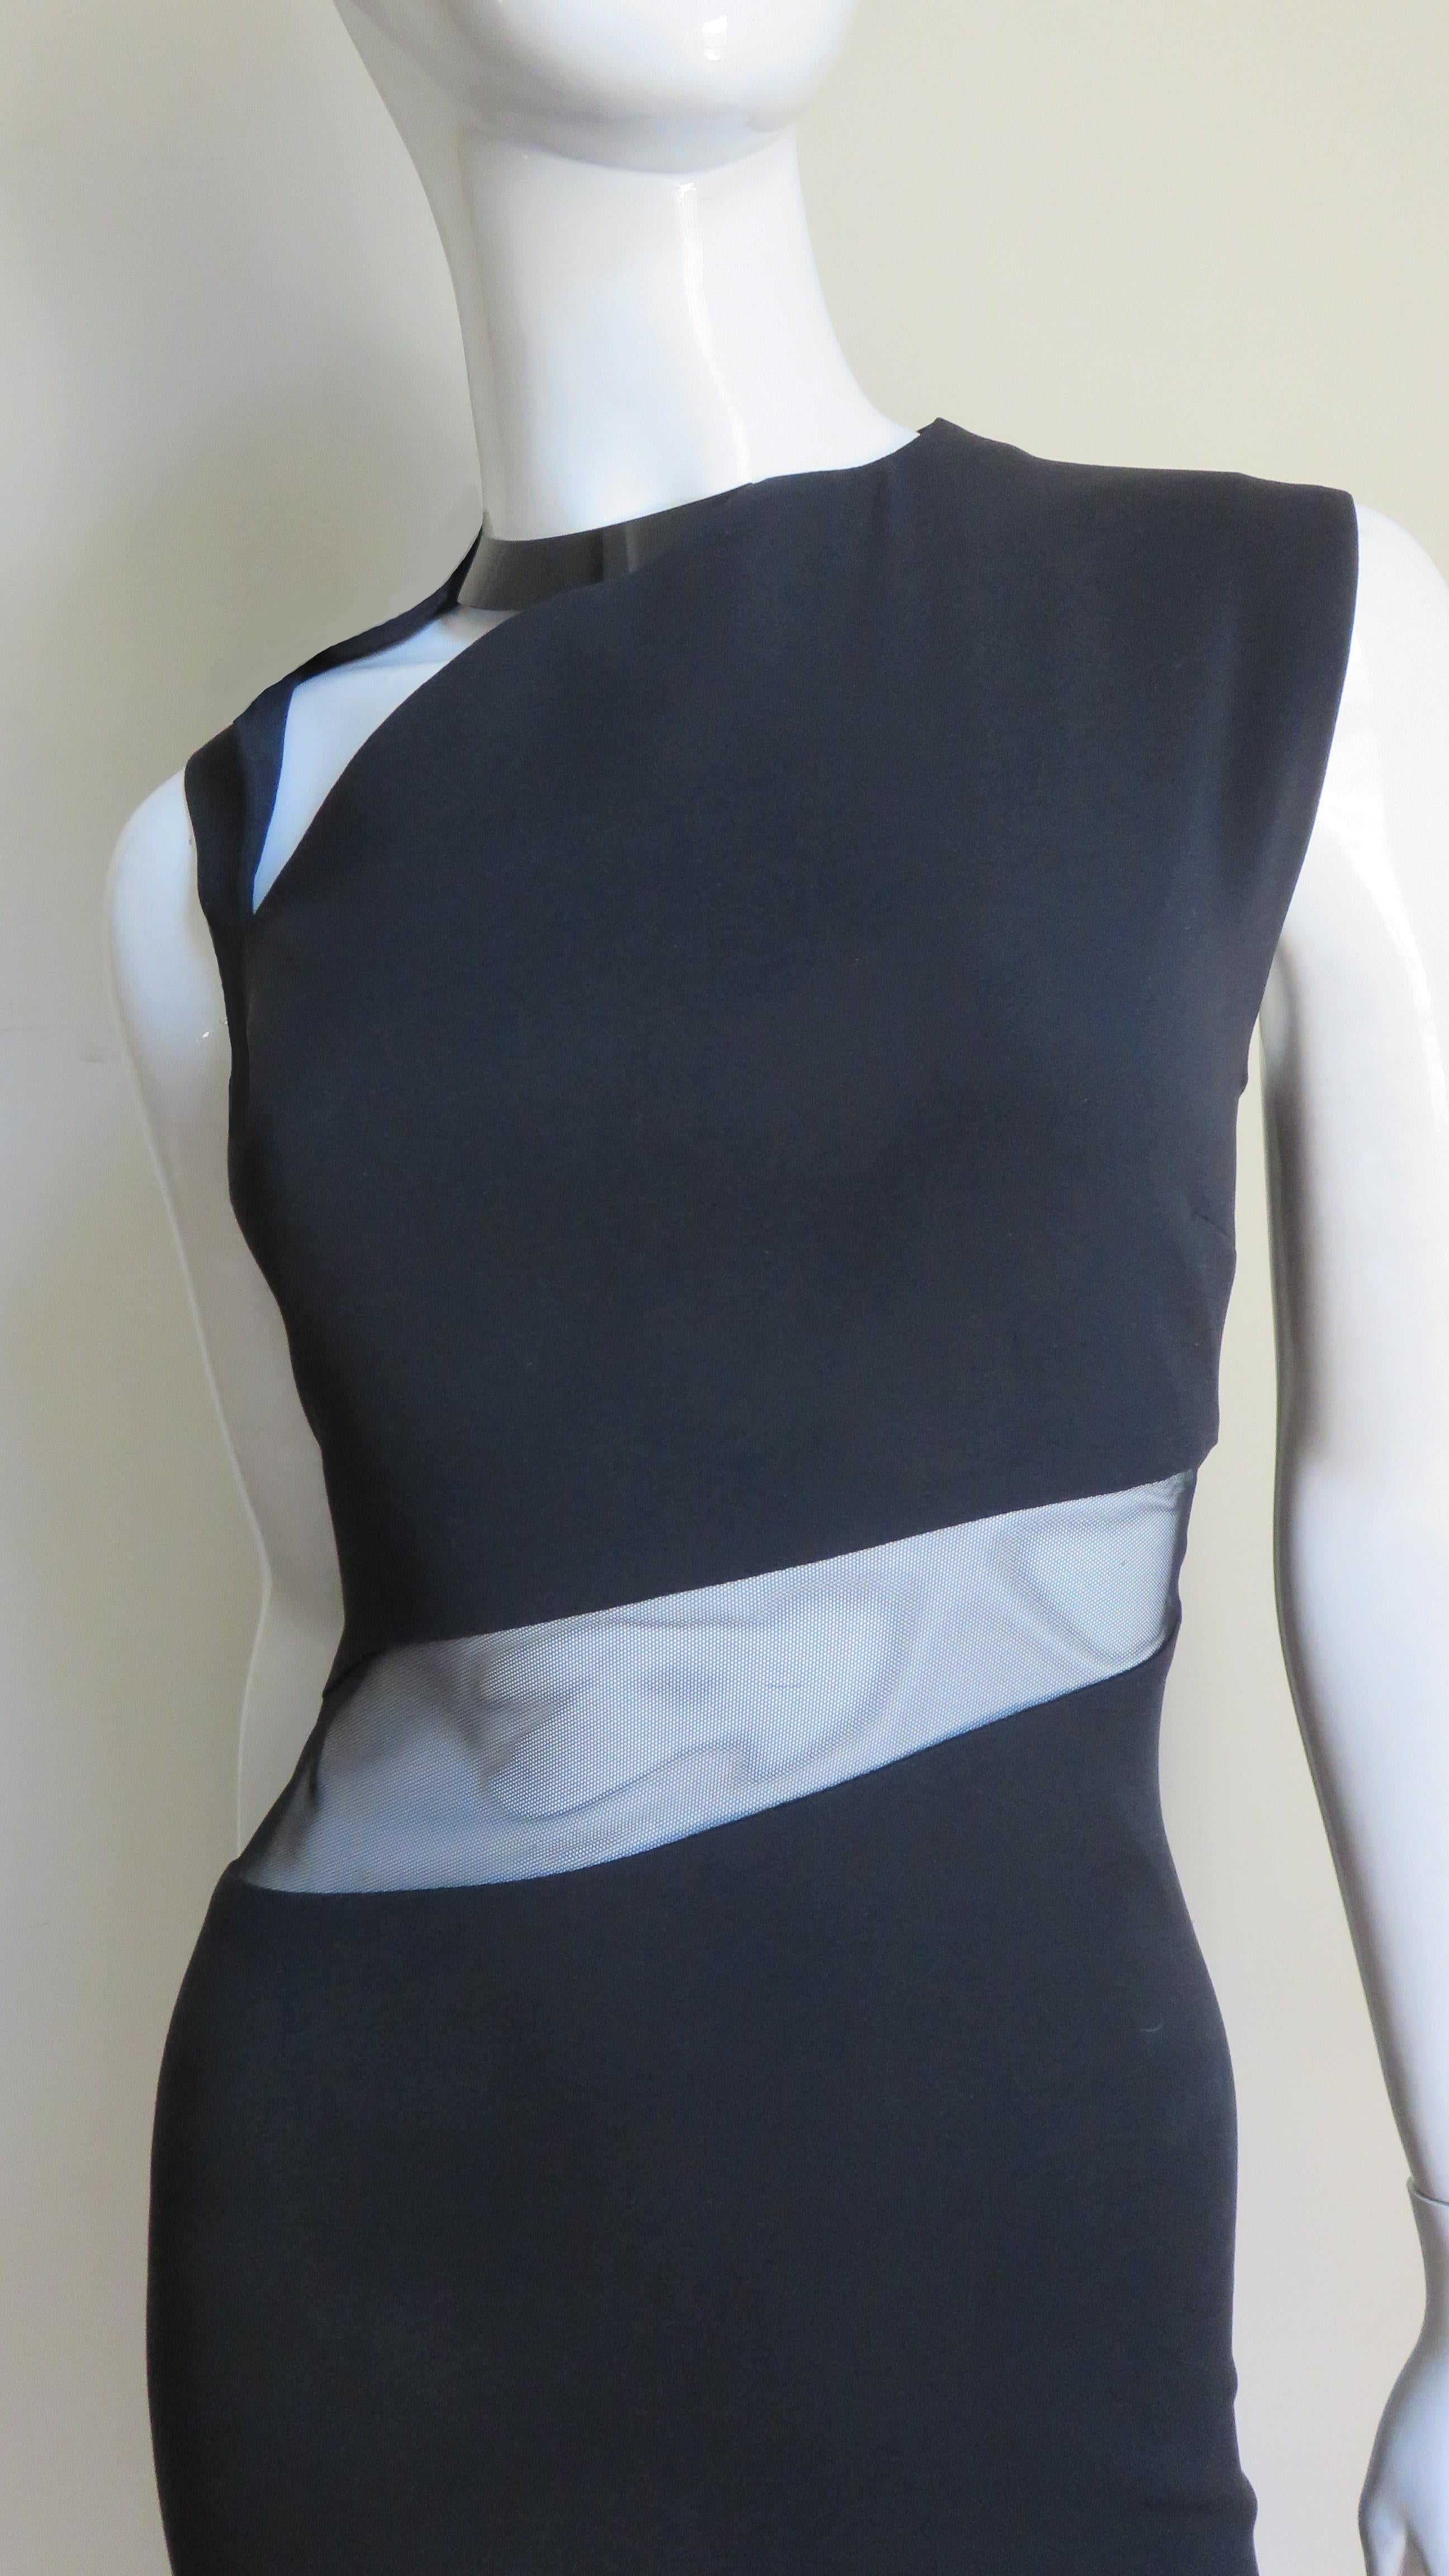 Gucci Silk Dress with Cut outs and Metal Collar In Good Condition For Sale In Water Mill, NY